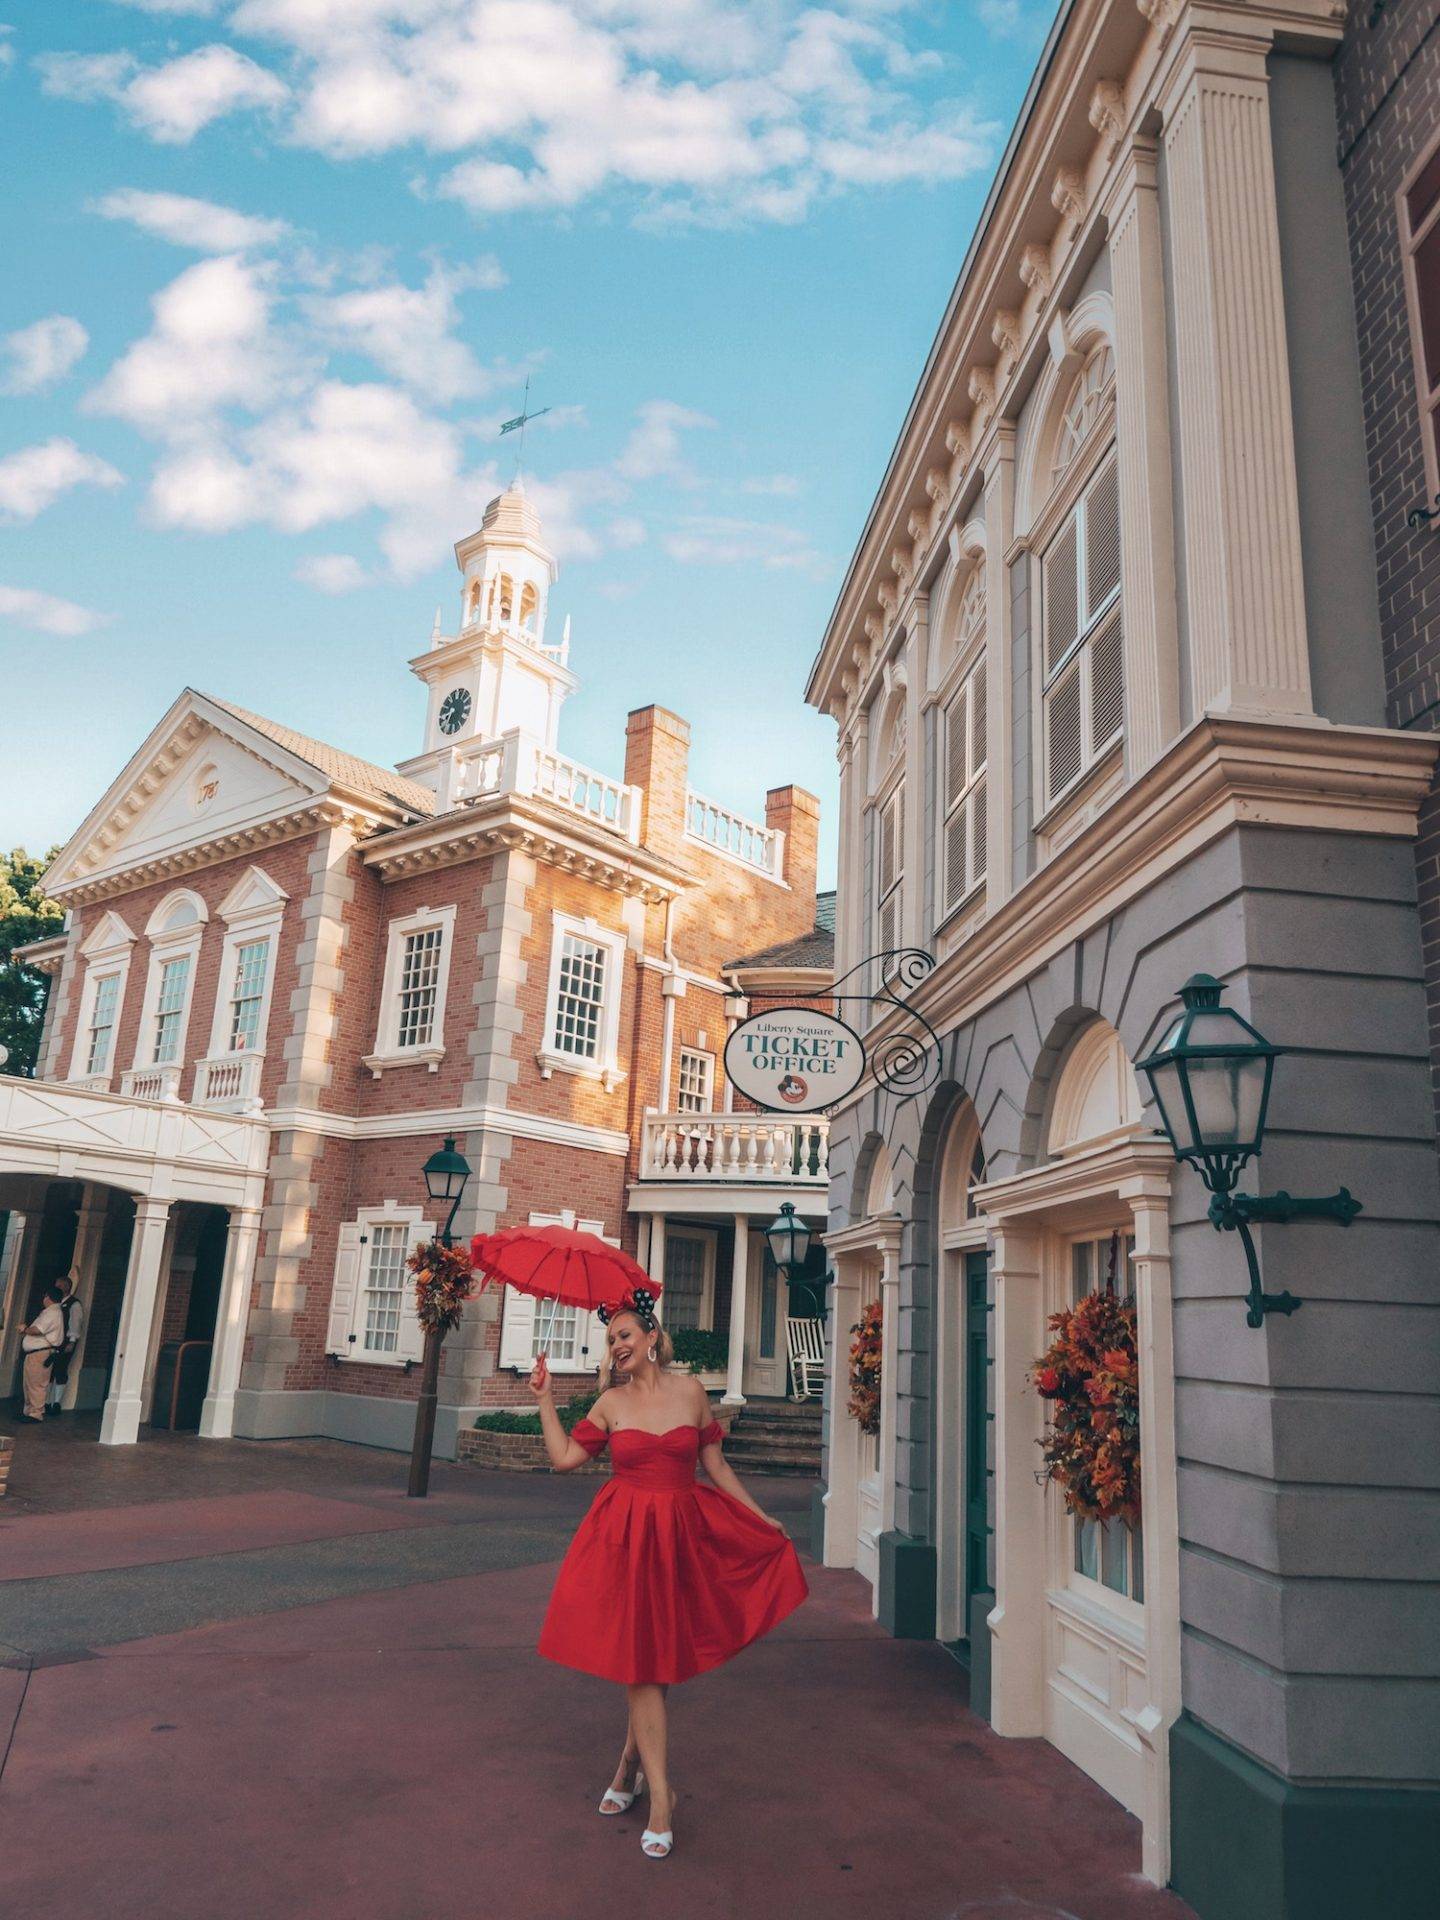 Mary Poppins vibes in Liberty Square at Disney World. Click the photo for a complete guide on how to get the perfect photo at Disney! Includes a list of all the top Disney World photo spots. via www.kirstenwendlandt.com